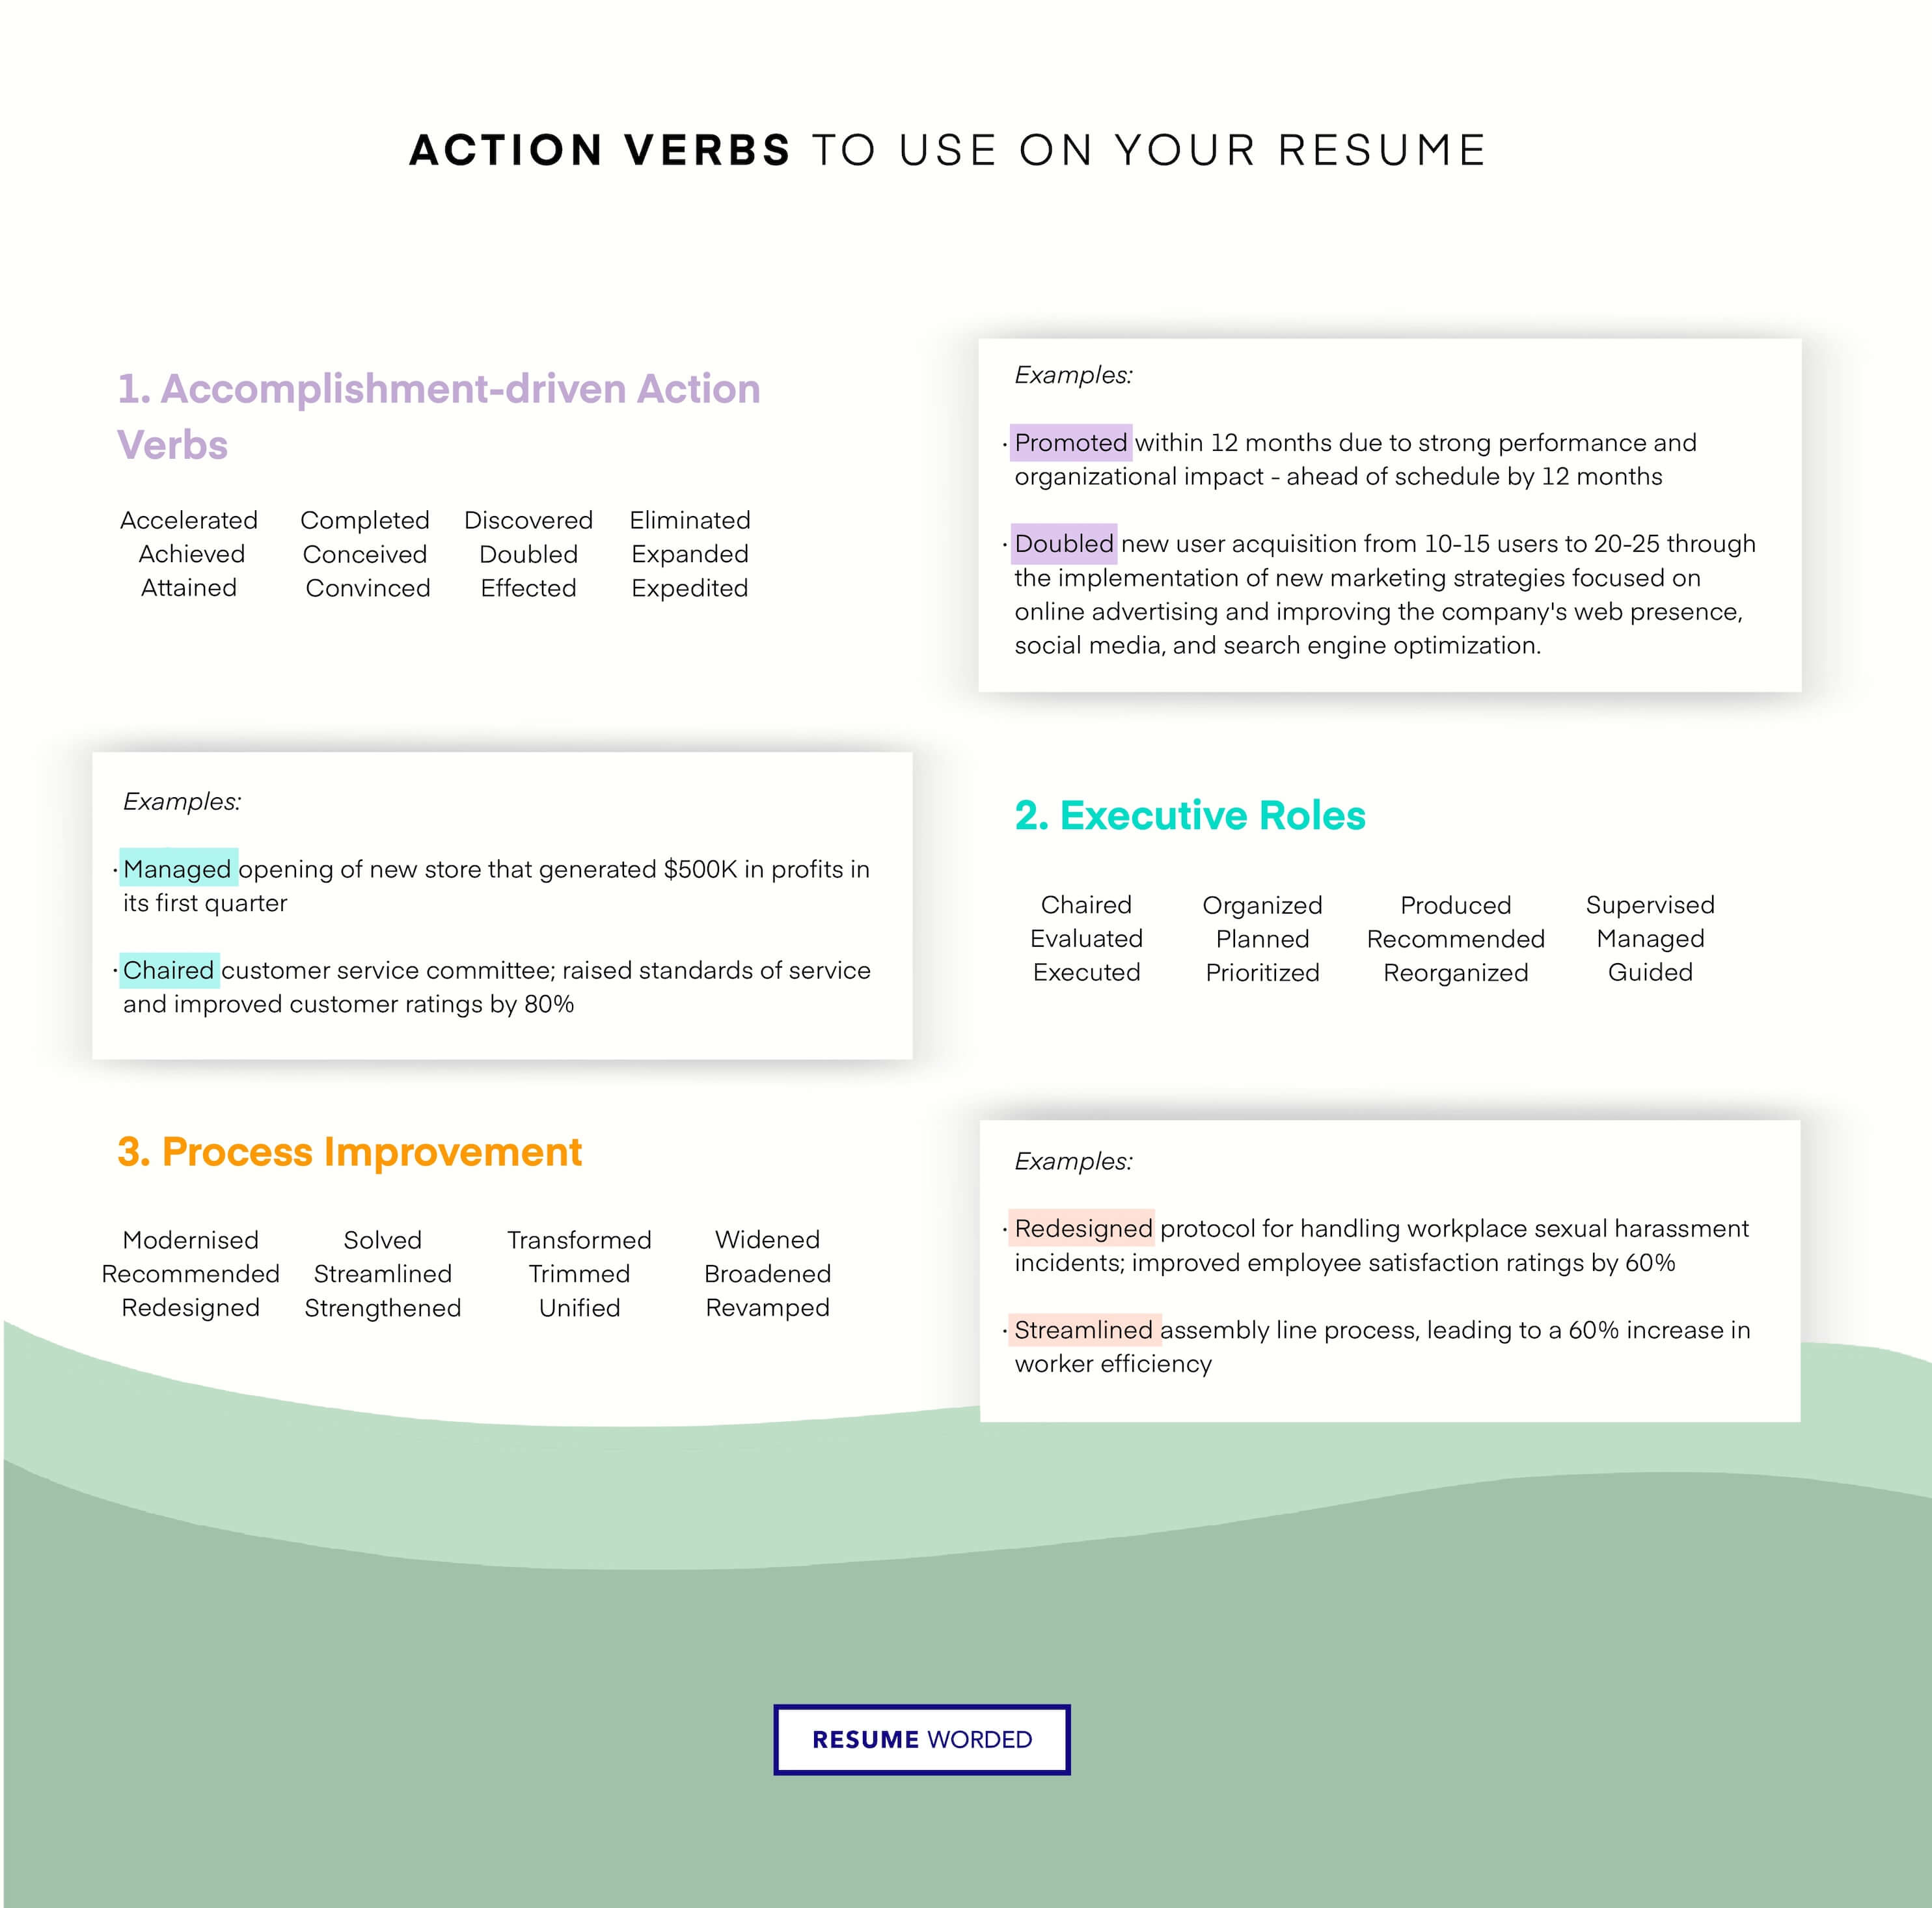 Format your bullet points using the [Action Verb] + [Task] + [Metric]